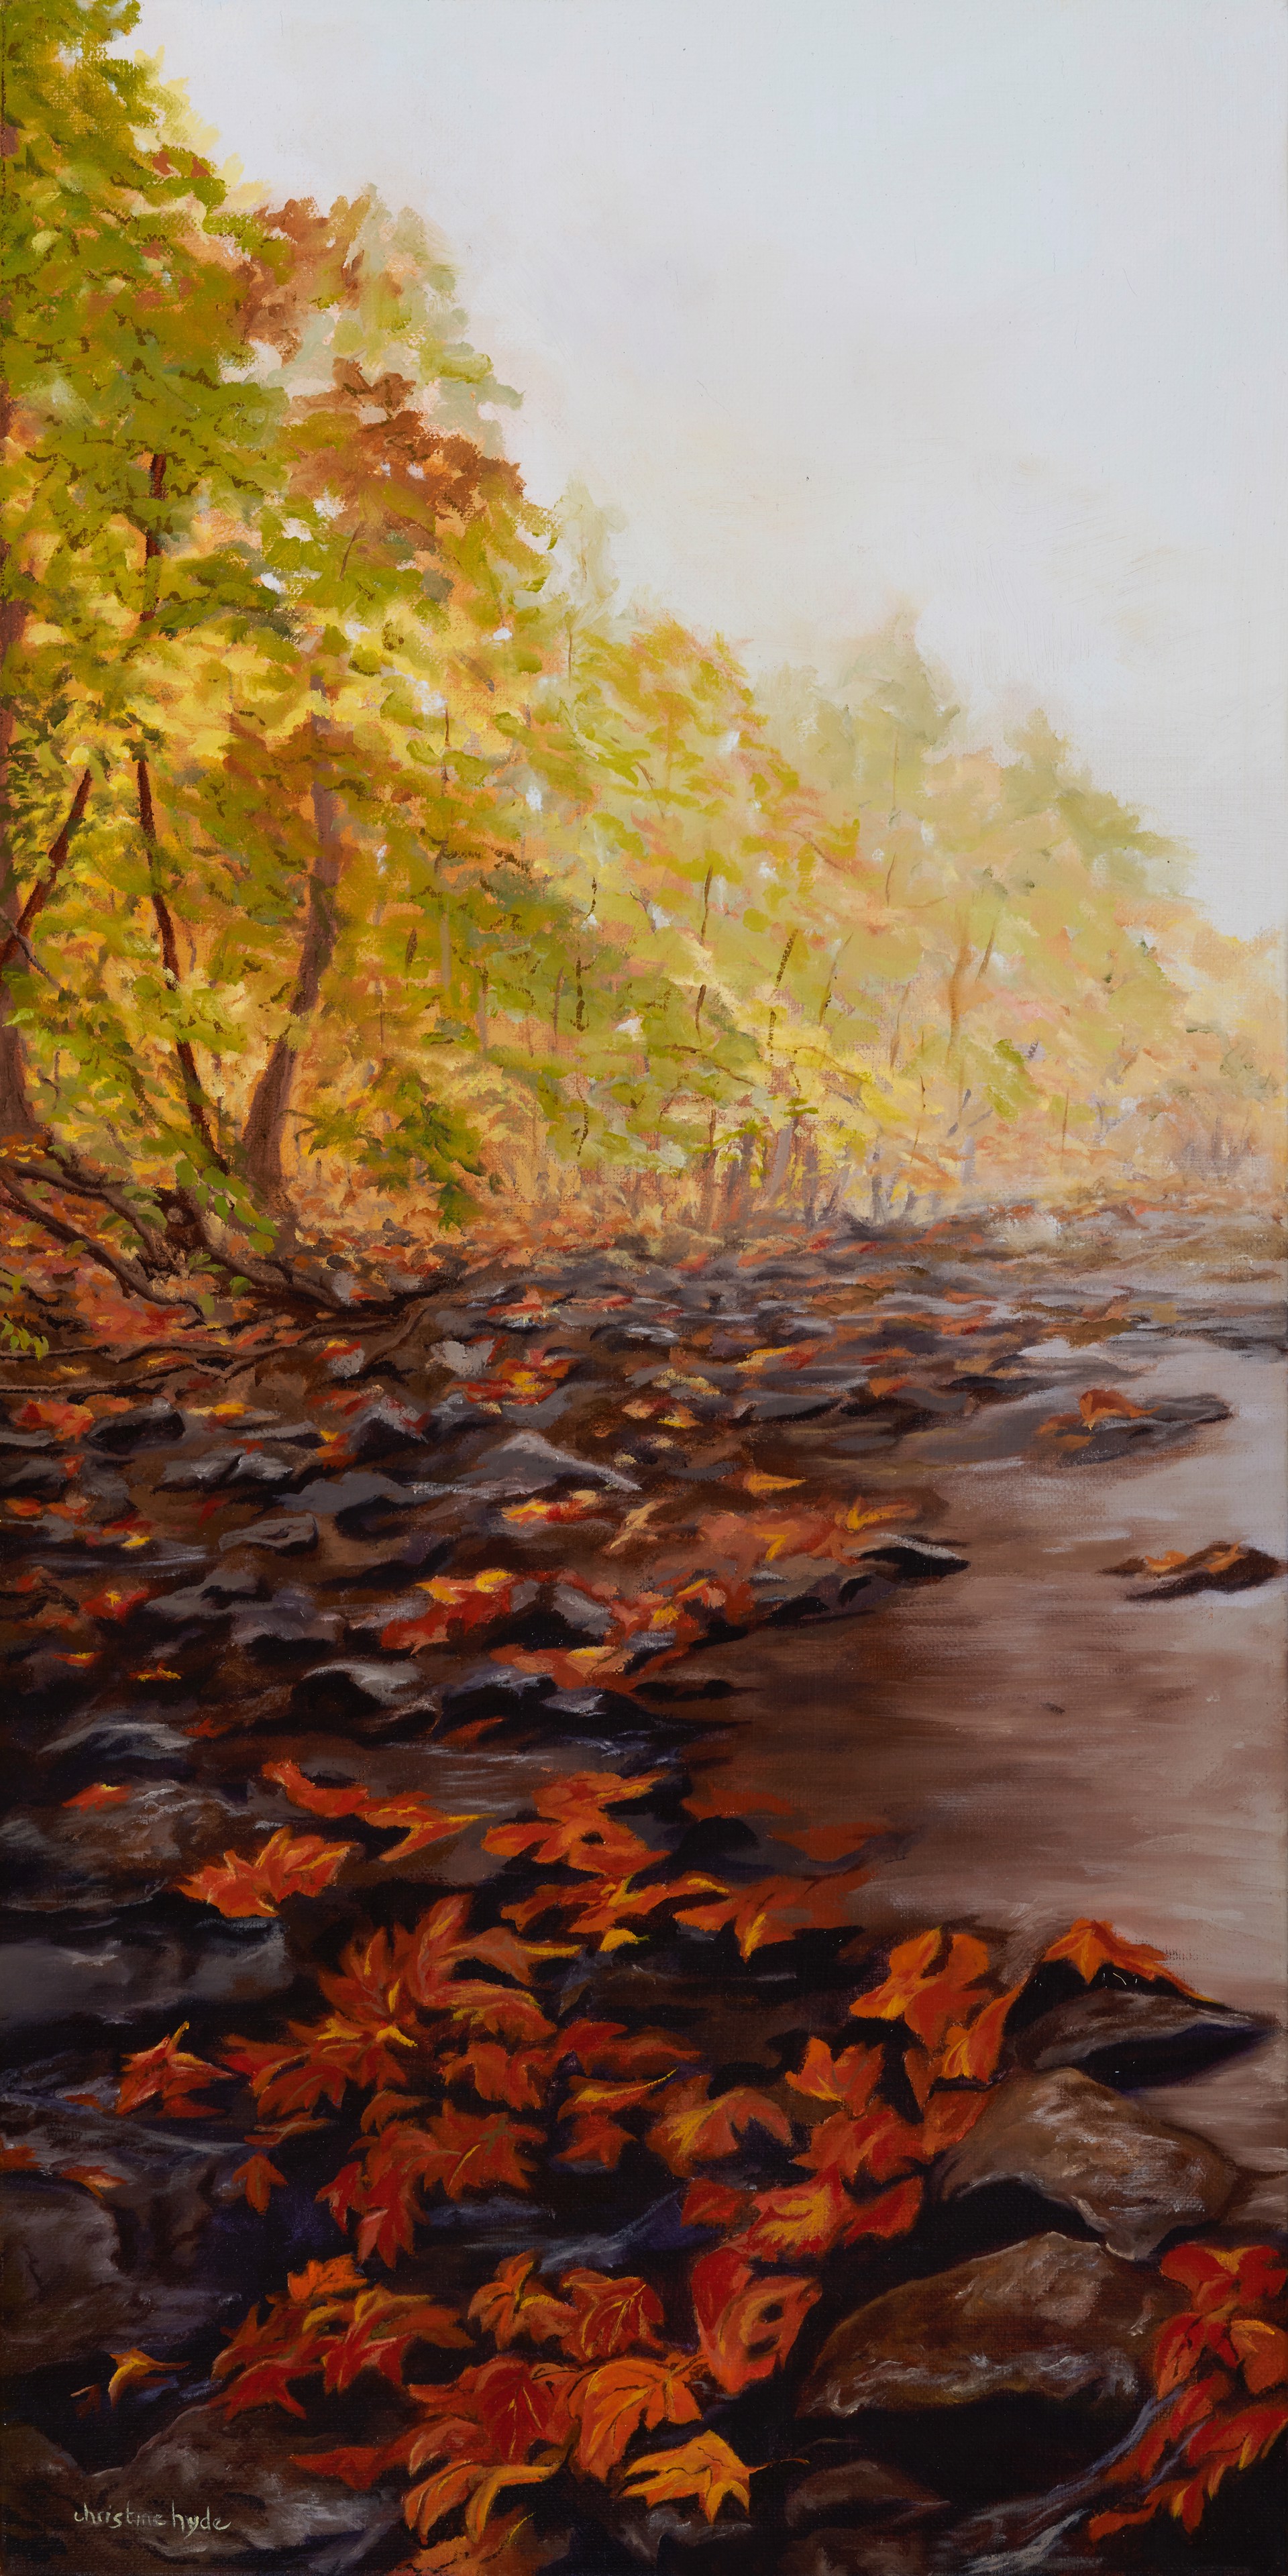 Autumn on the Creek by Christine Hyde